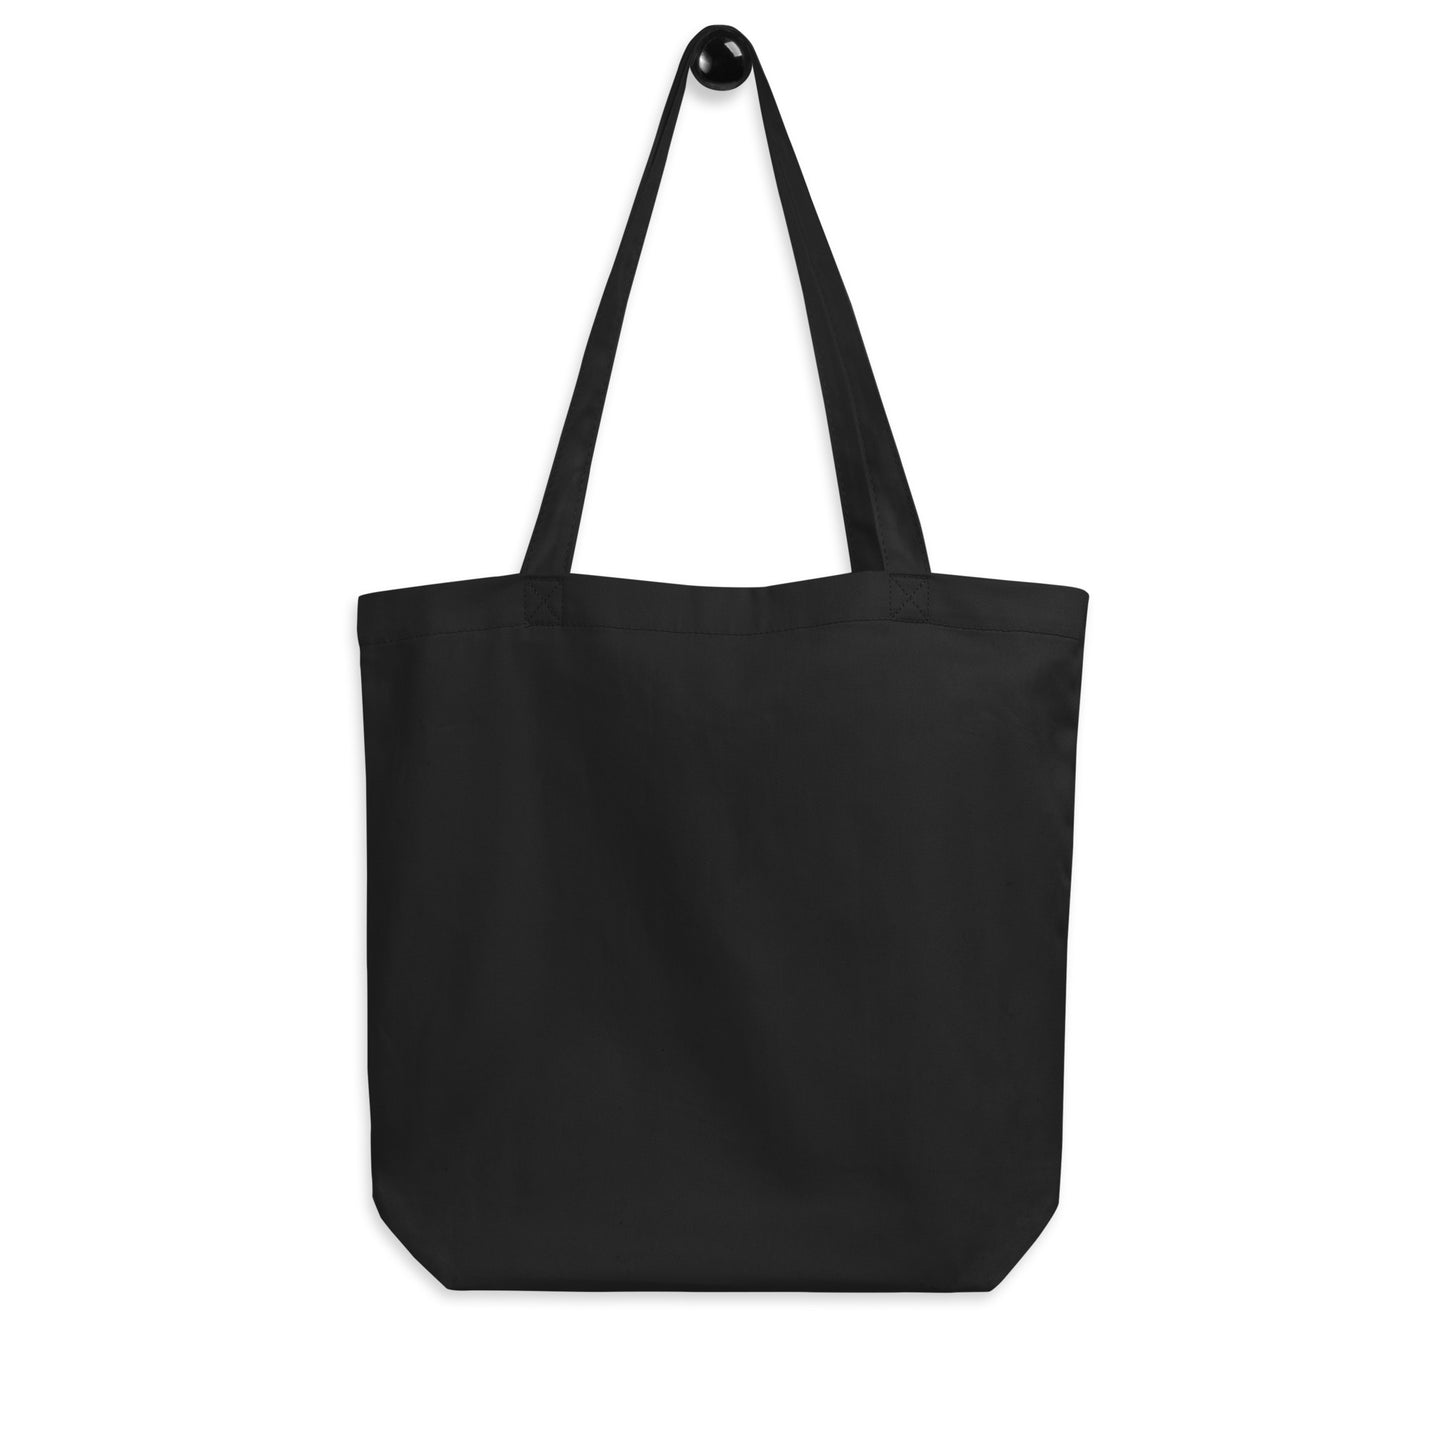 Unique Travel Gift Organic Tote - White Oval • BUD Budapest • YHM Designs - Image 05